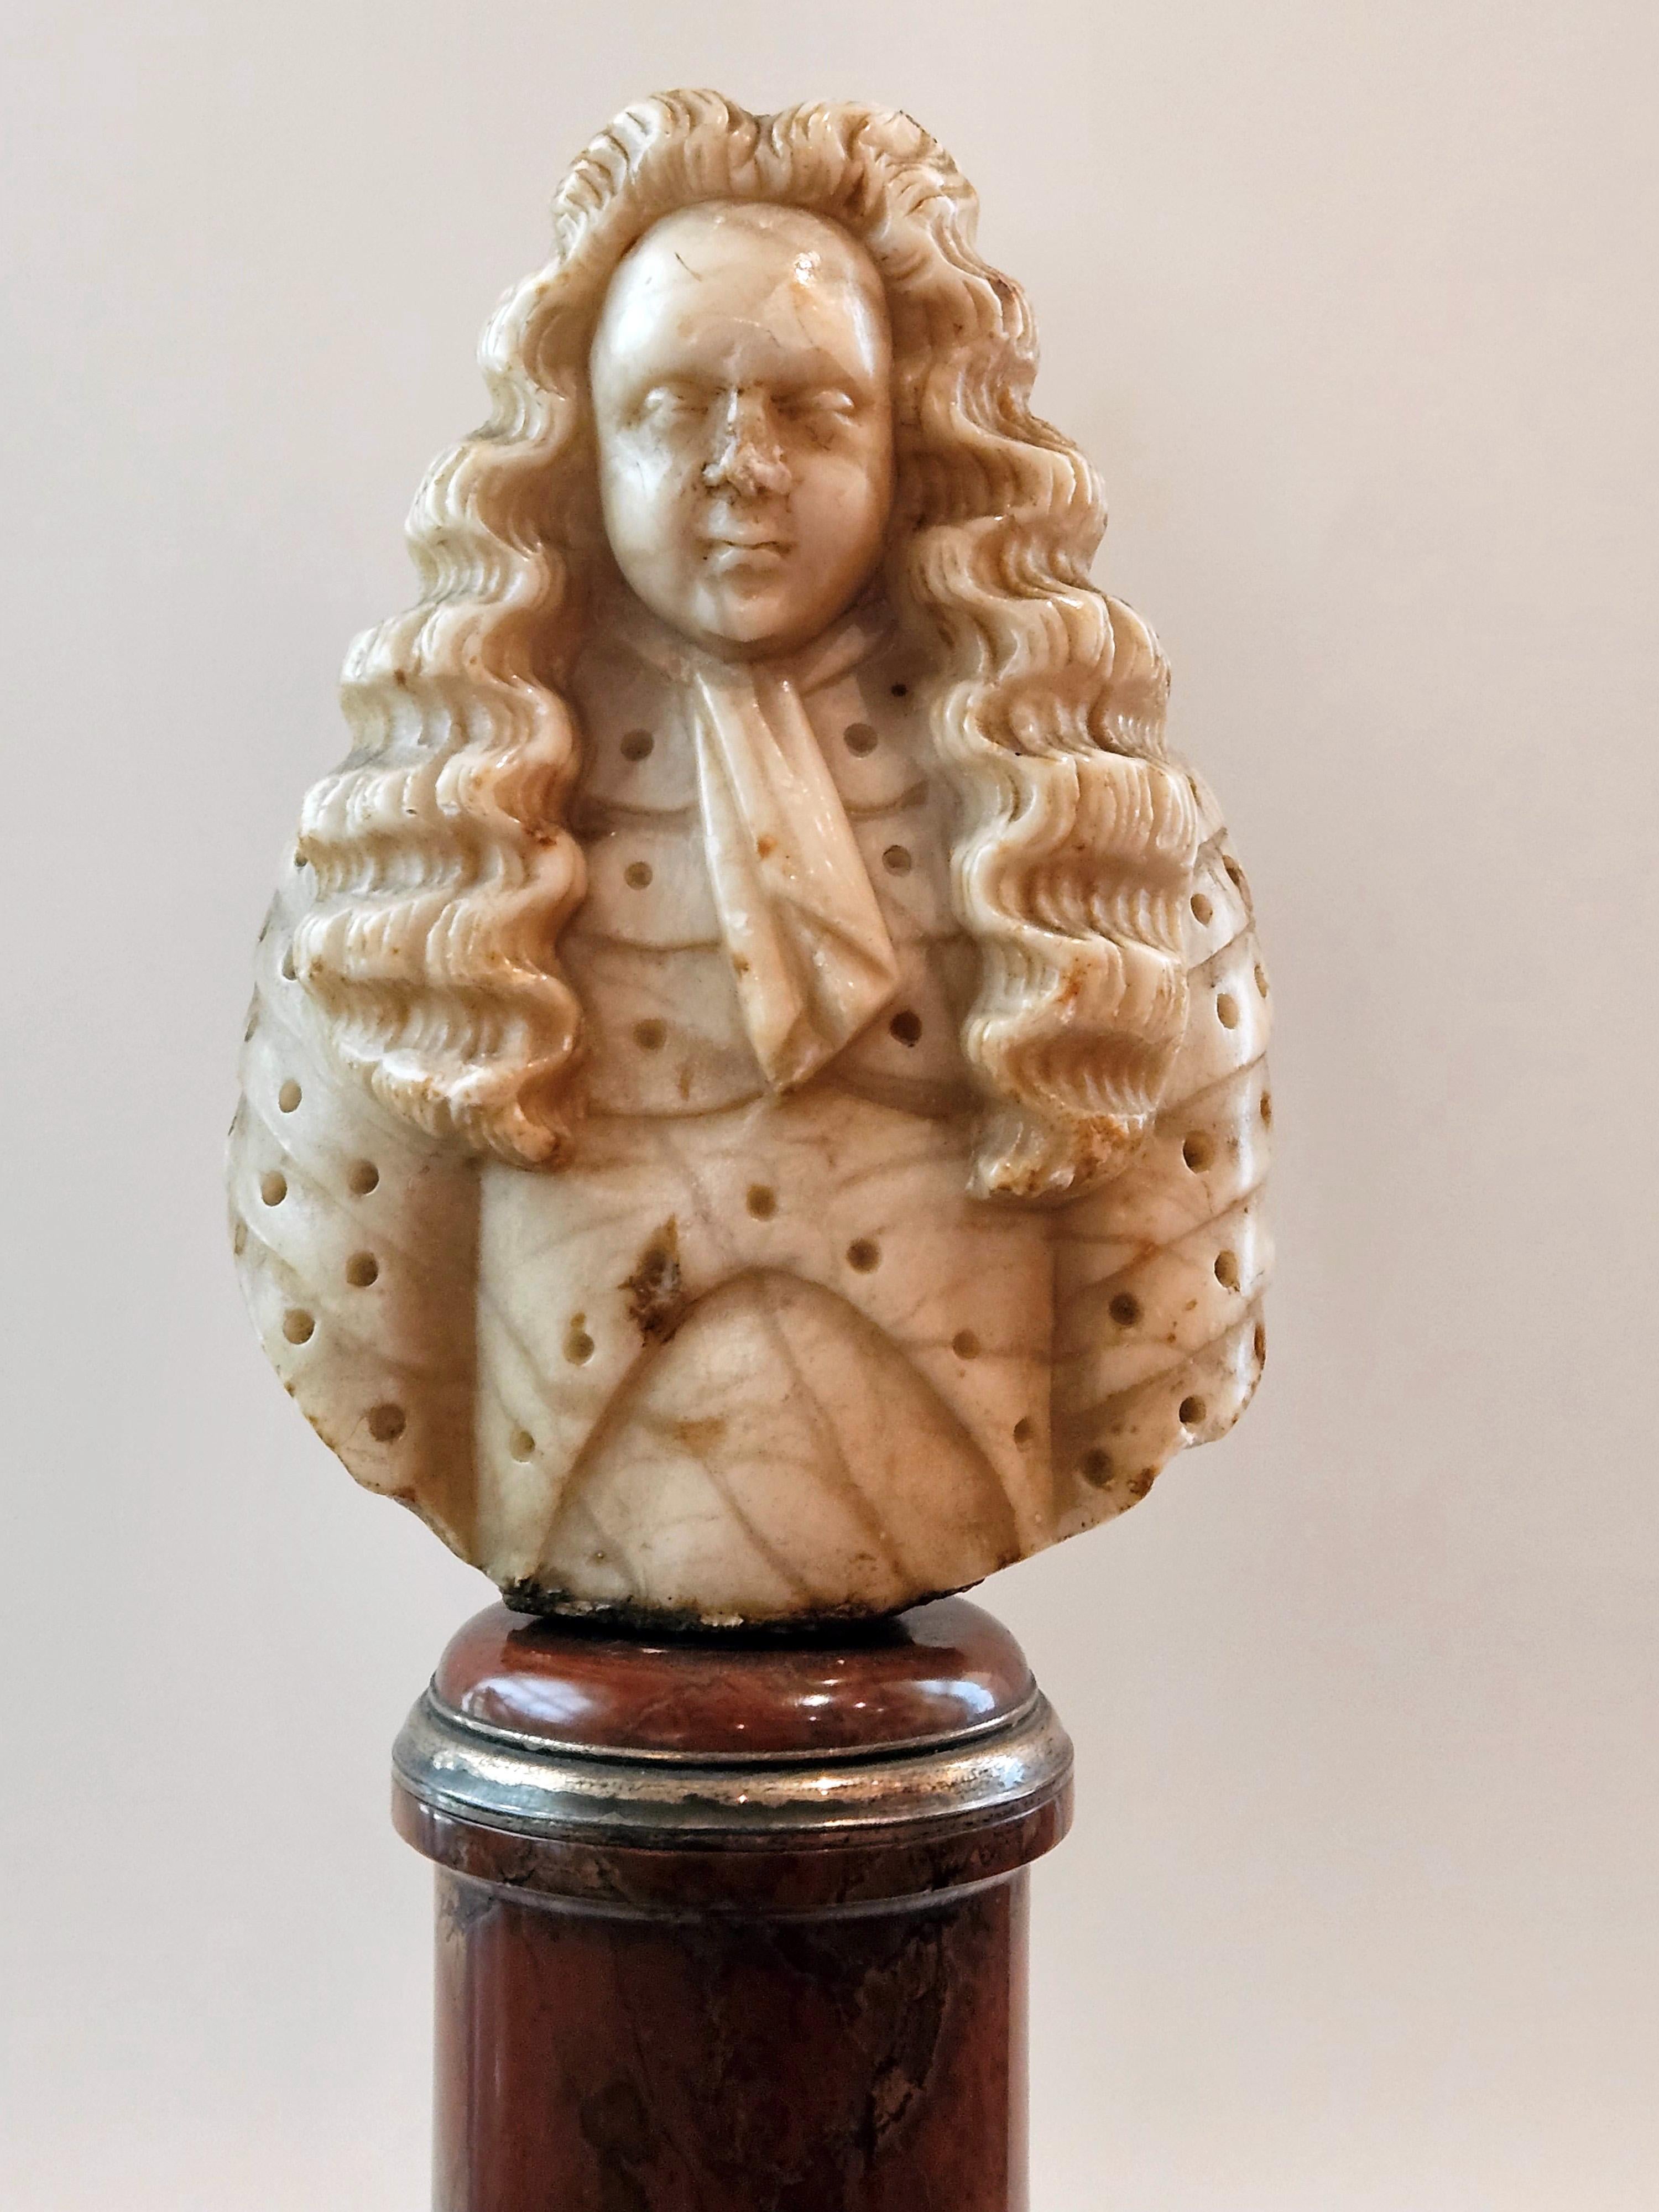 Louis XIV style bust of a man in armor.
France, Late 17th century 
Alabaster on a griotte red marble base
Base diameter 7 cm 
Bust width 8.5 cm